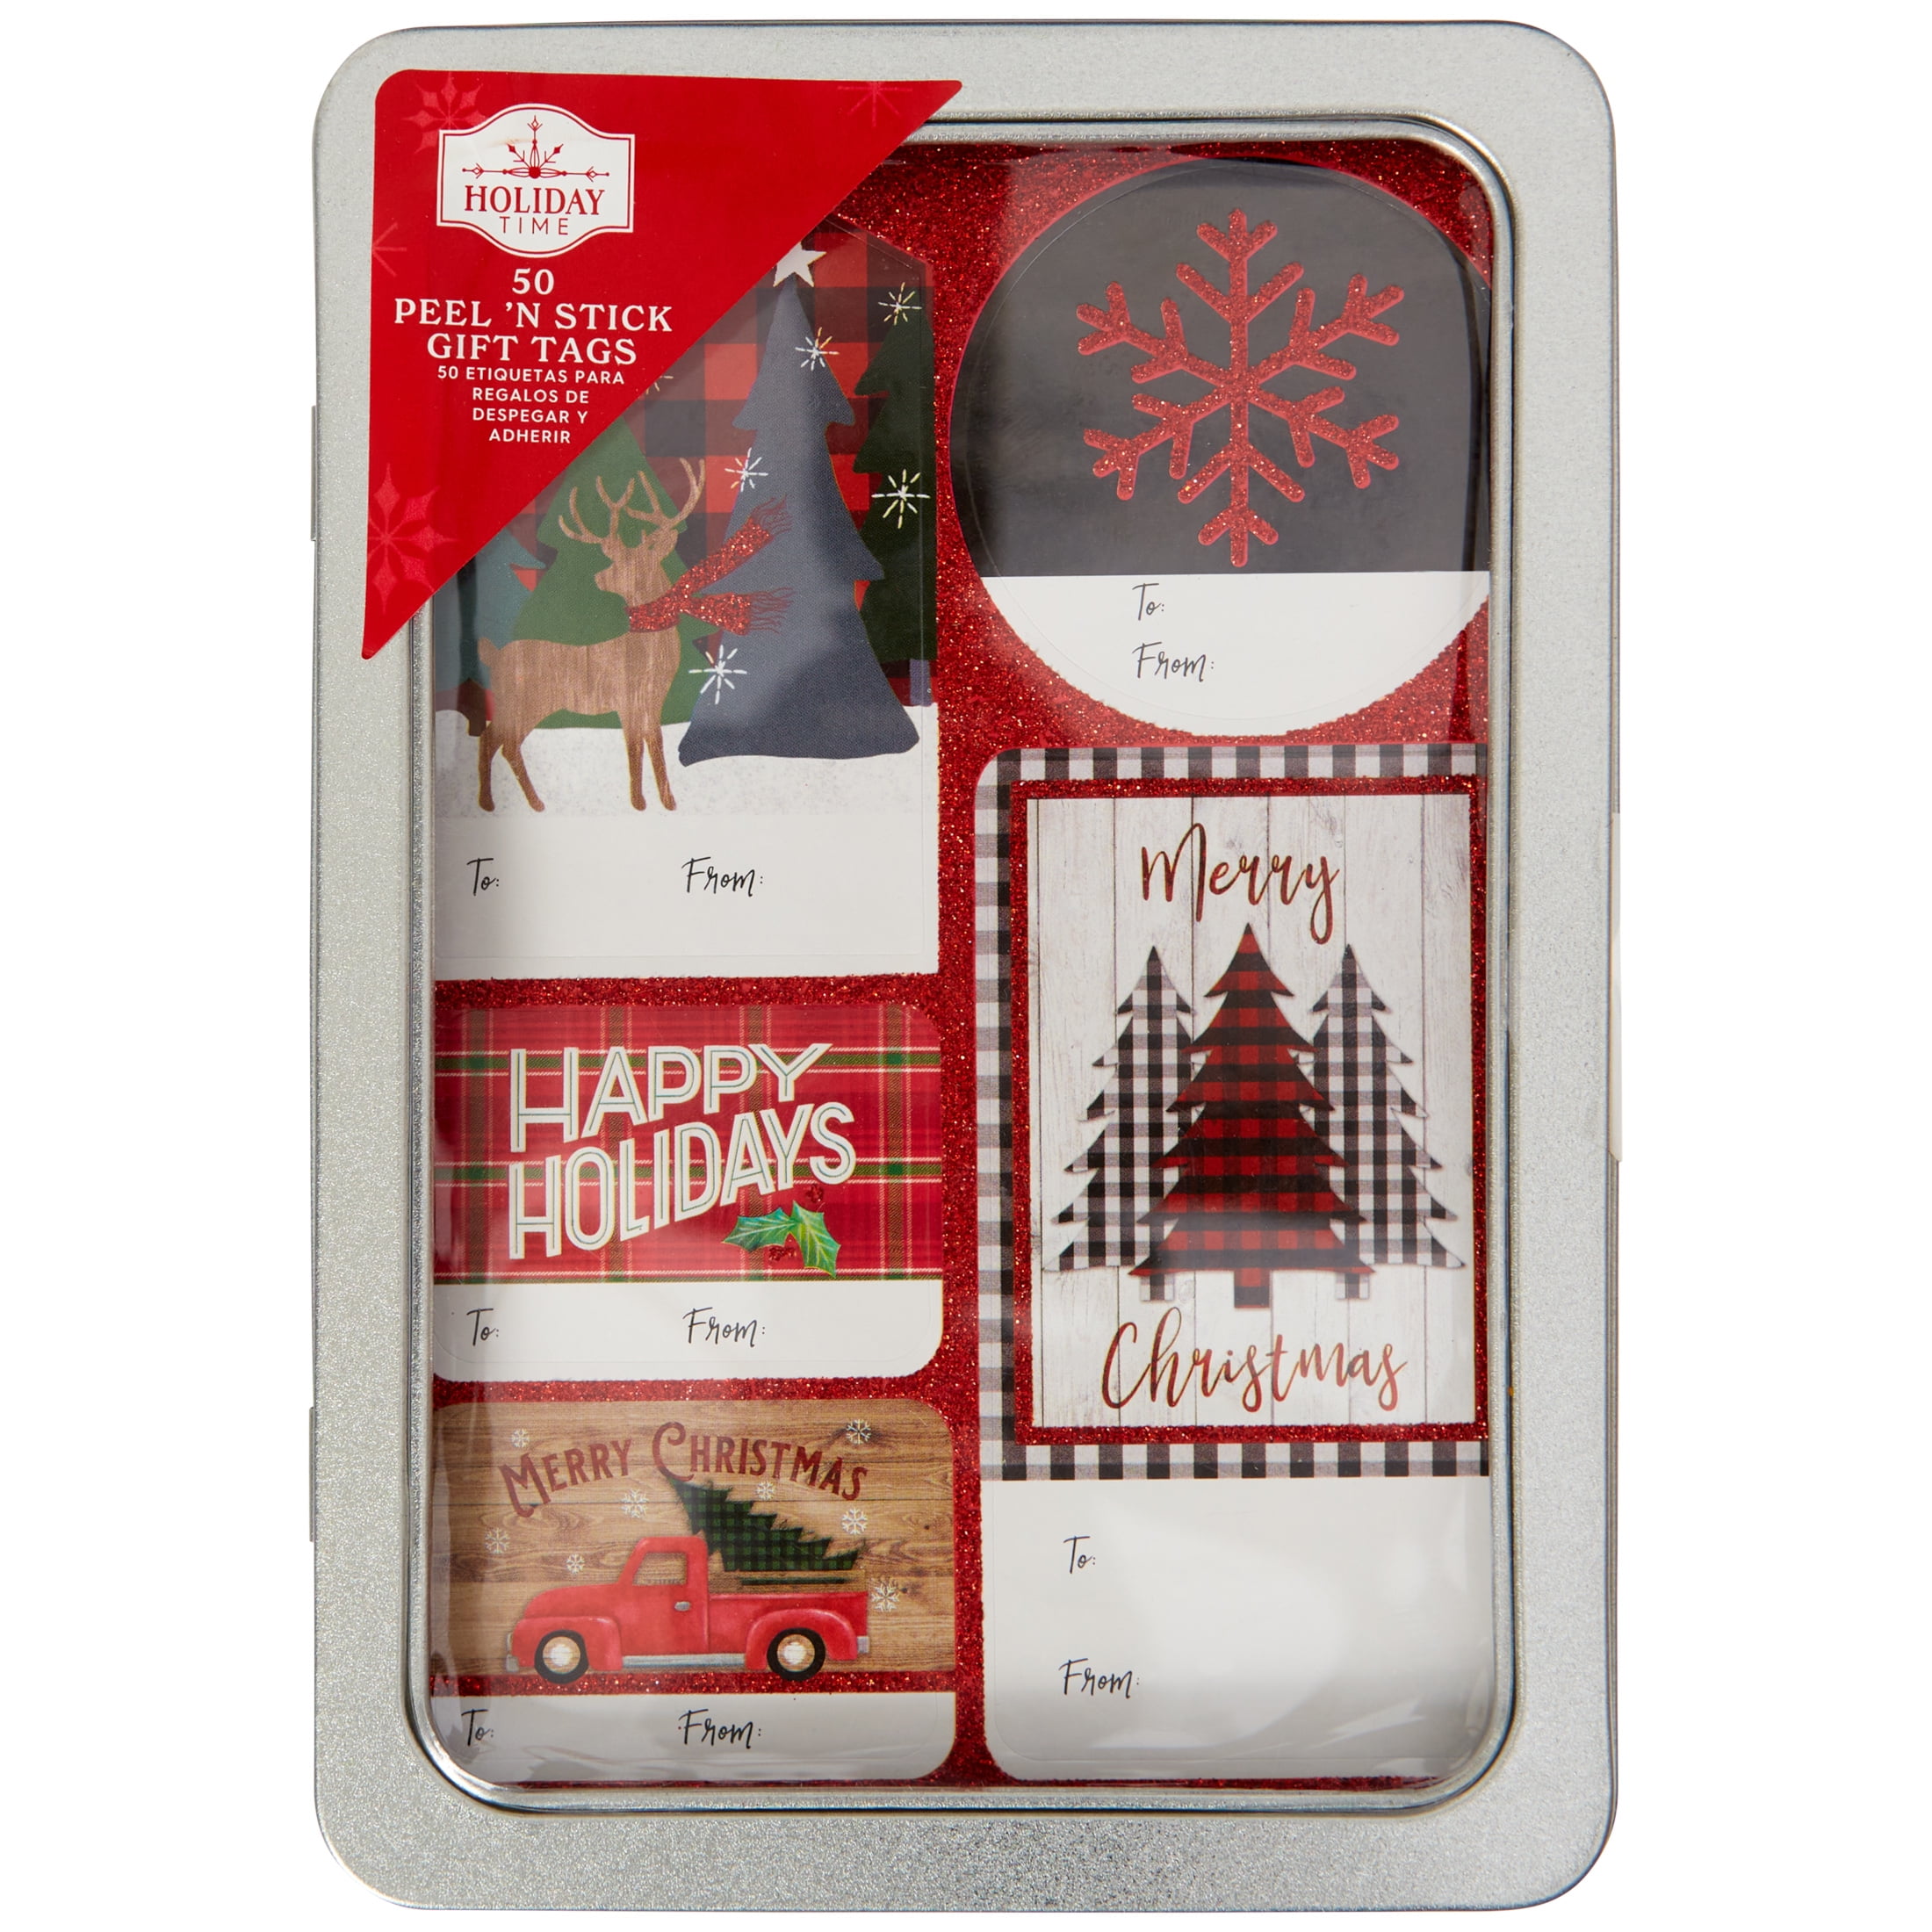 Holiday Time Traditional Themed Peel 'N Stick Gift Tags, Cute Red Glitter Embellished Classic Christmas Images, Self Stick Labels, 50 Count